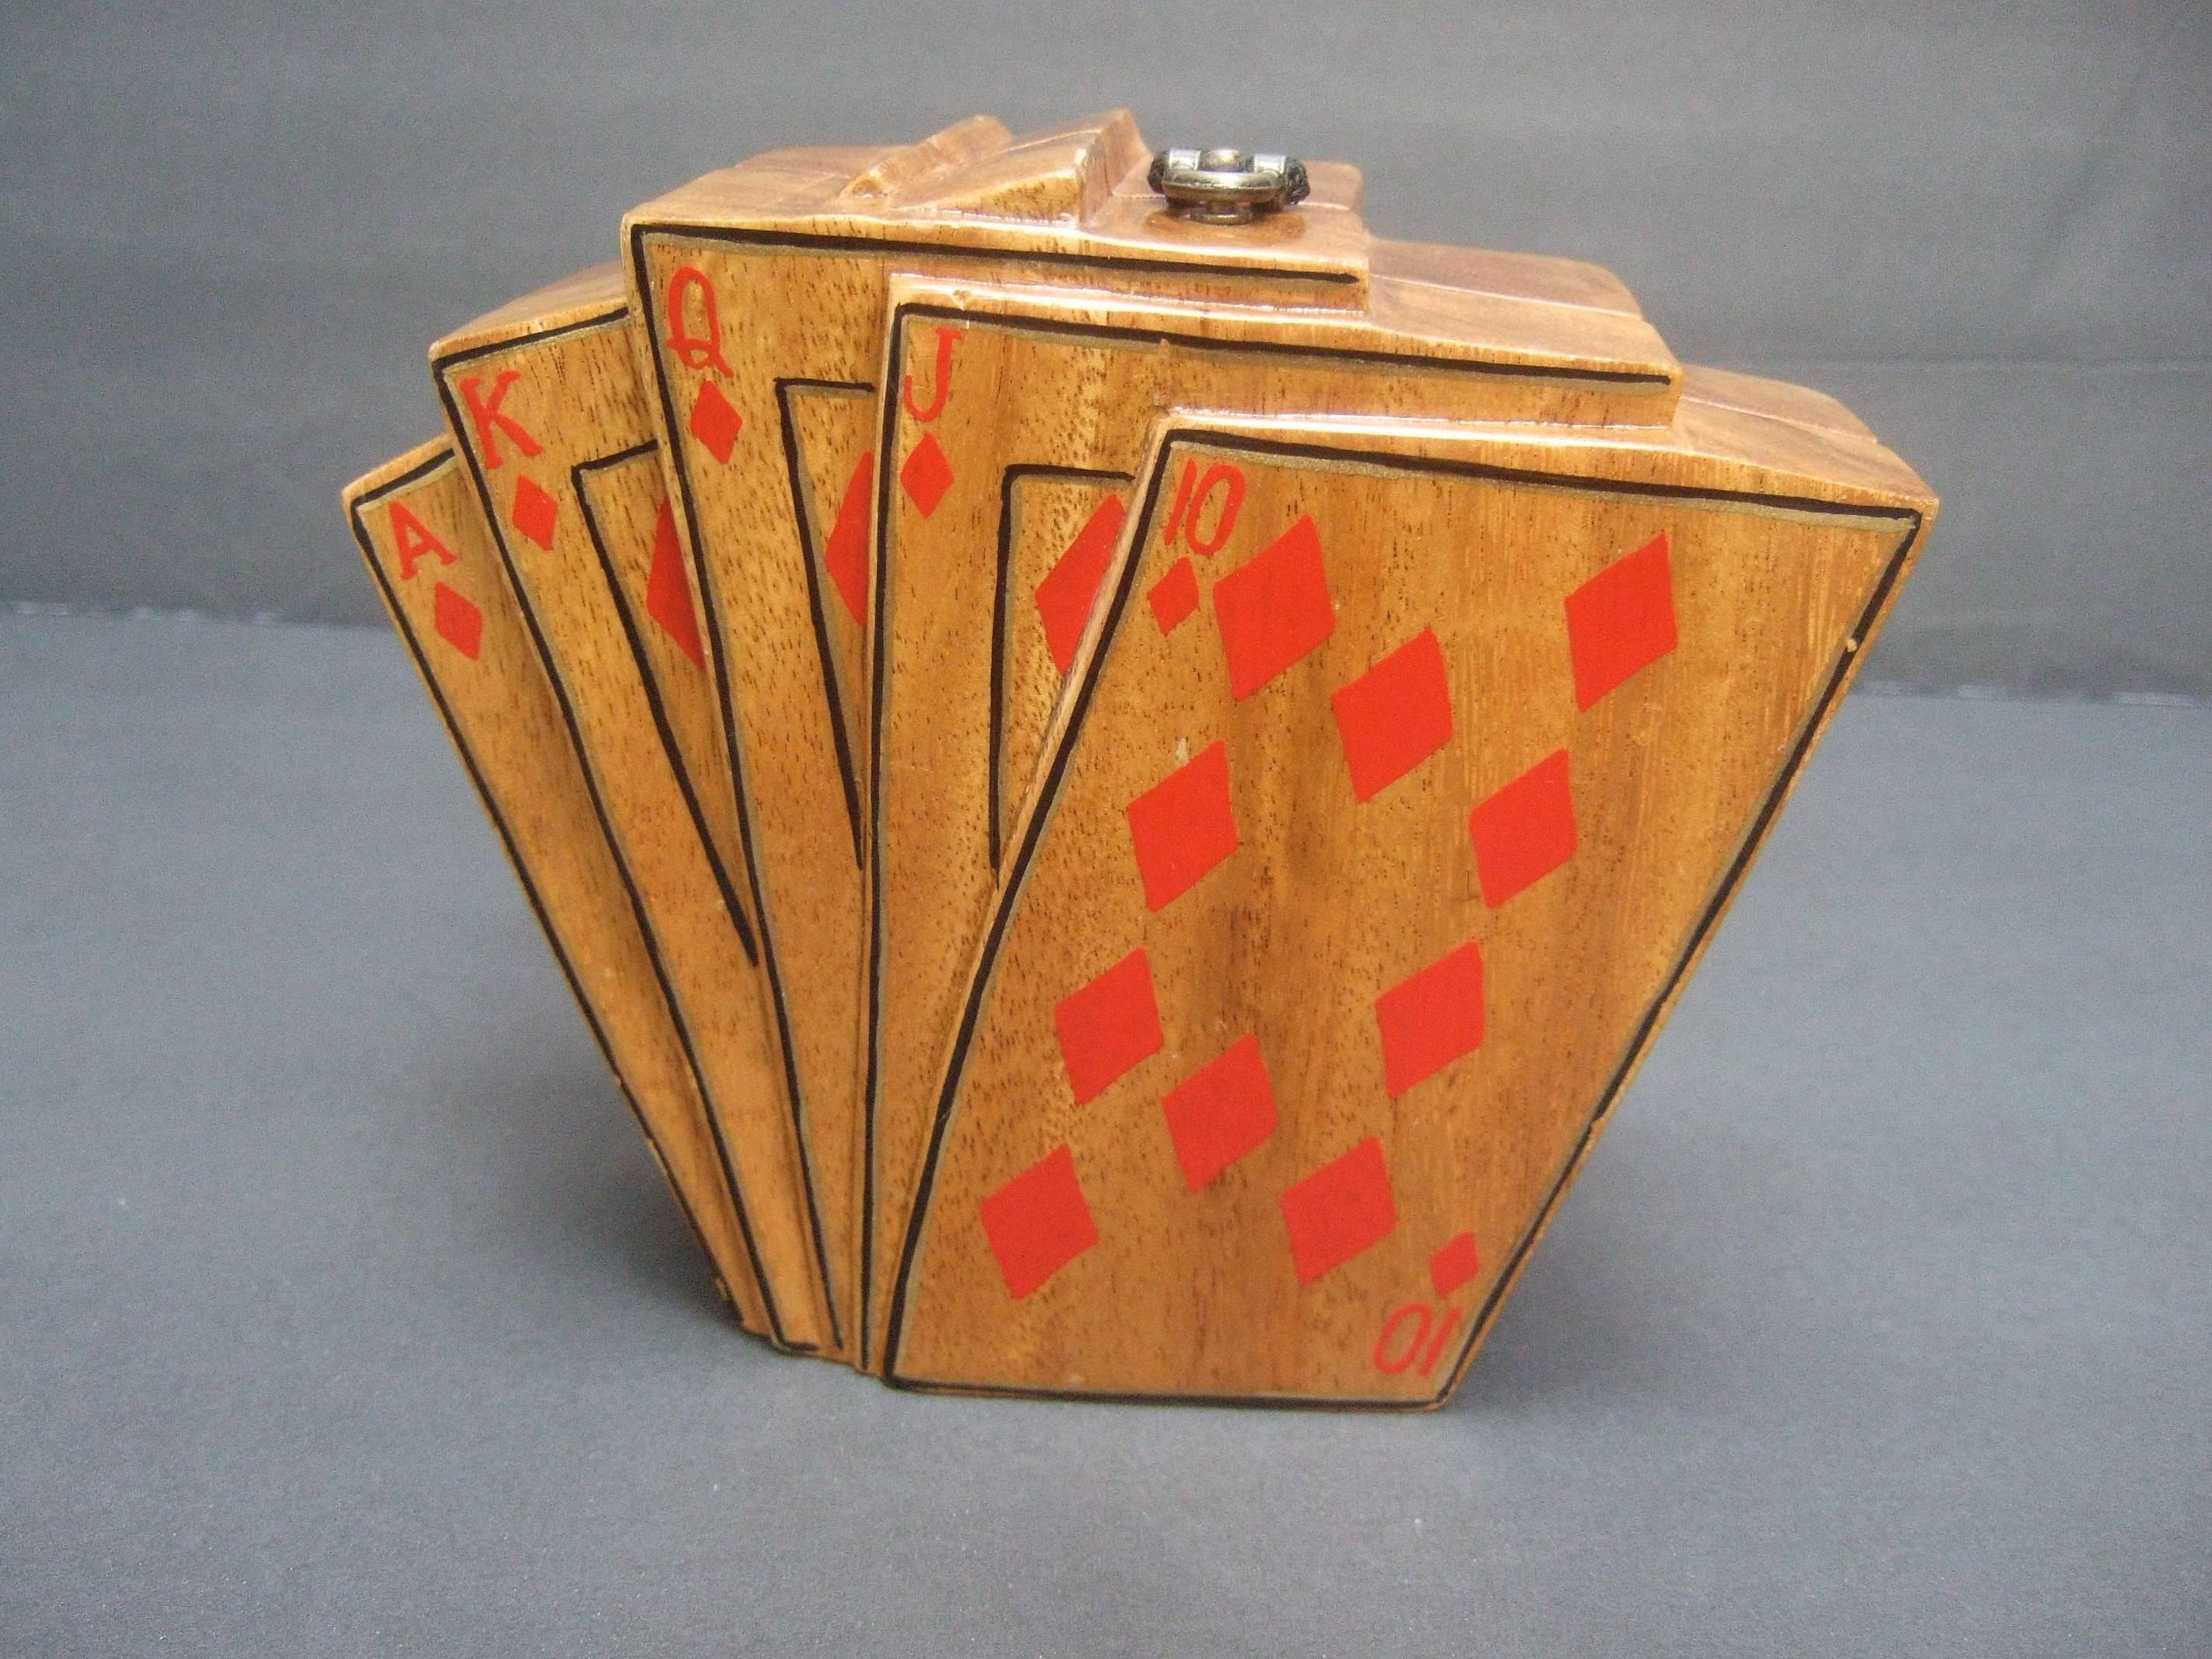 Timmy Woods Beverly Hills Unique playing card handbag c 1990's
The wood card theme artisan handbag is decorated with red 
enamel diamond cards in a flush sequence 

The handmade whimsical handbag is designed
with wood from fallen acacia trees